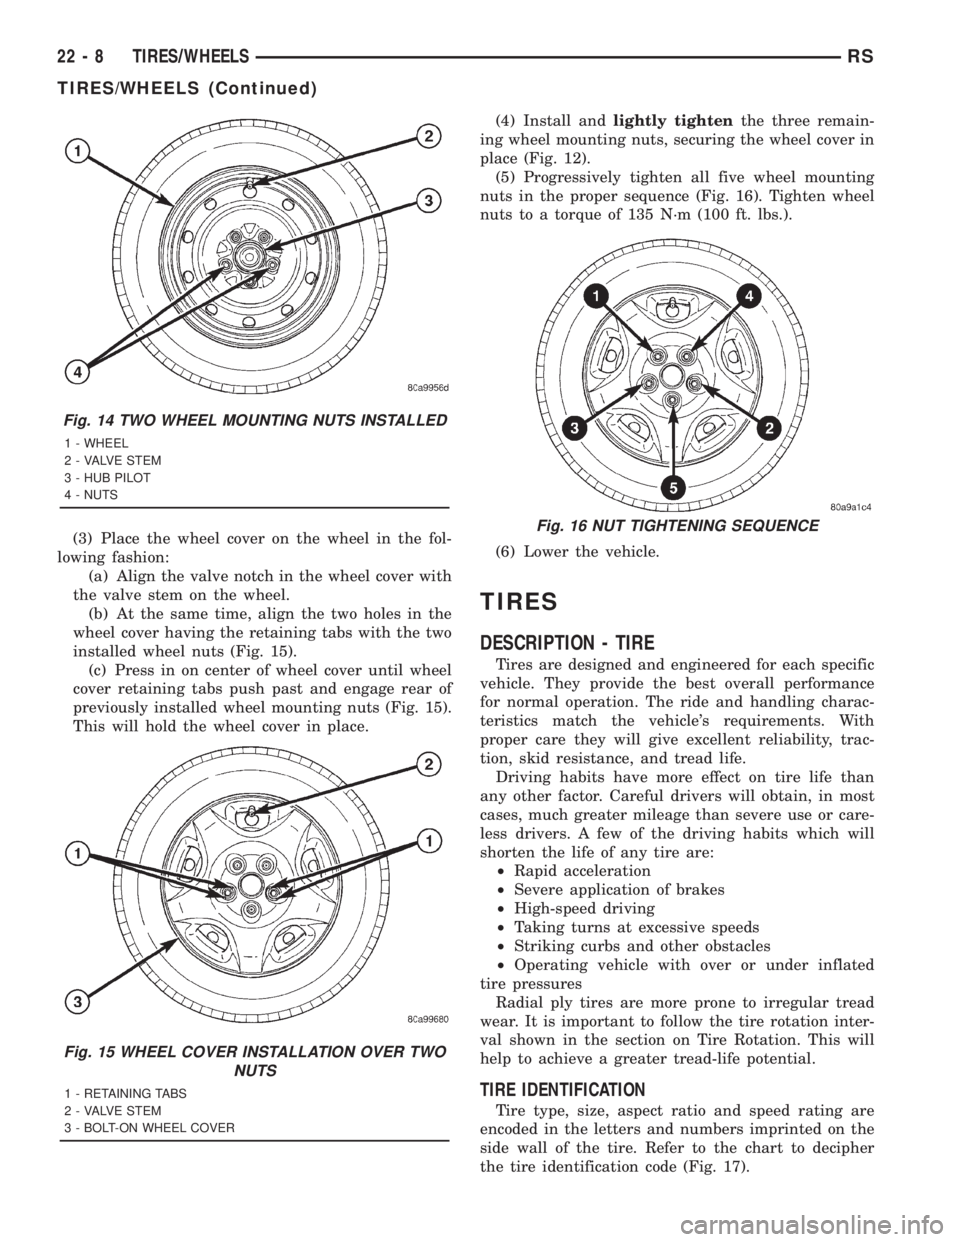 CHRYSLER VOYAGER 2001  Service Manual (3) Place the wheel cover on the wheel in the fol-
lowing fashion:
(a) Align the valve notch in the wheel cover with
the valve stem on the wheel.
(b) At the same time, align the two holes in the
wheel